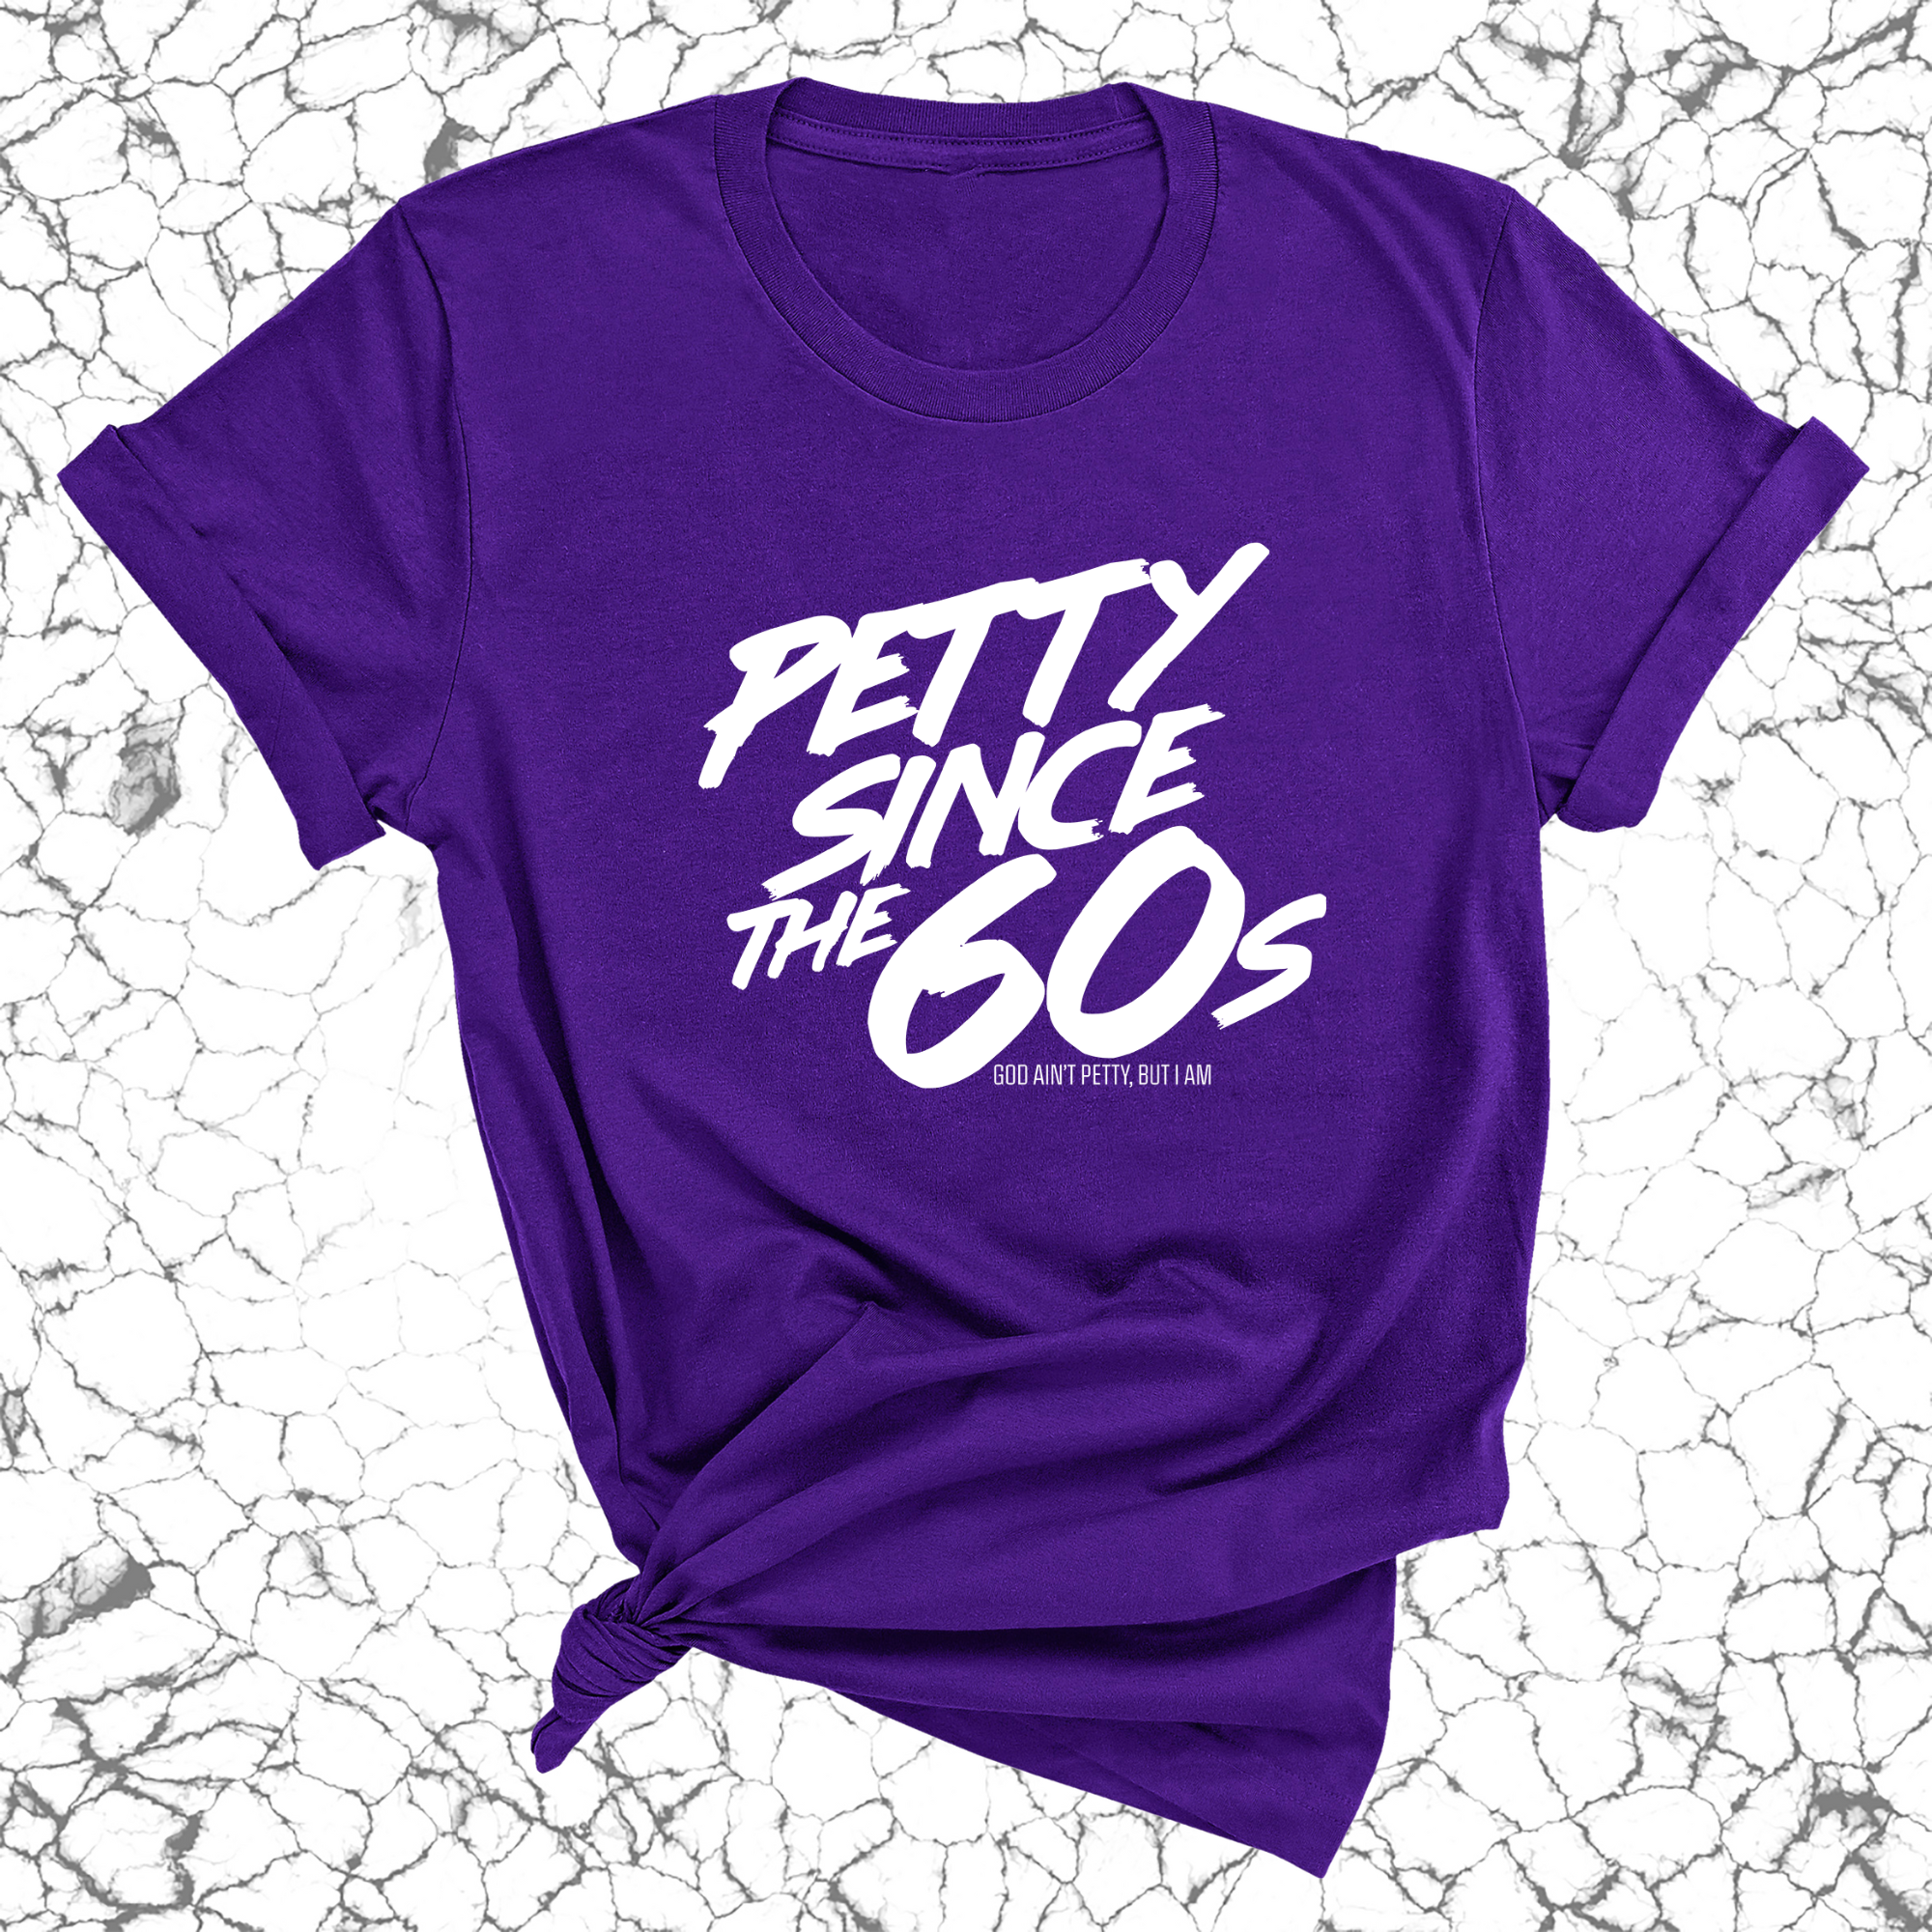 Petty Since the 60s Unisex Tee-T-Shirt-The Original God Ain't Petty But I Am